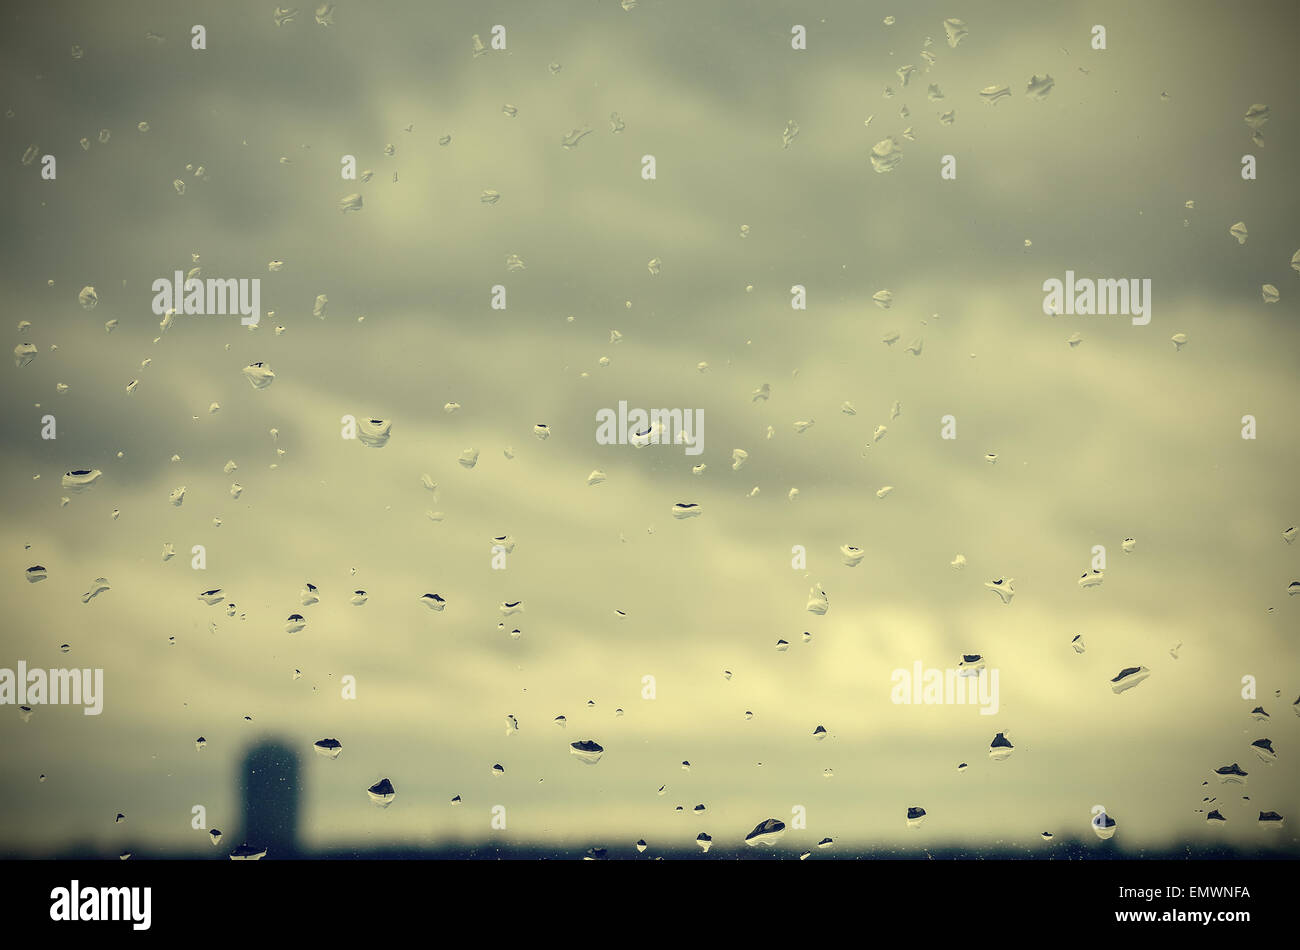 Retro filtered abstract background made of rain drops on window. Stock Photo